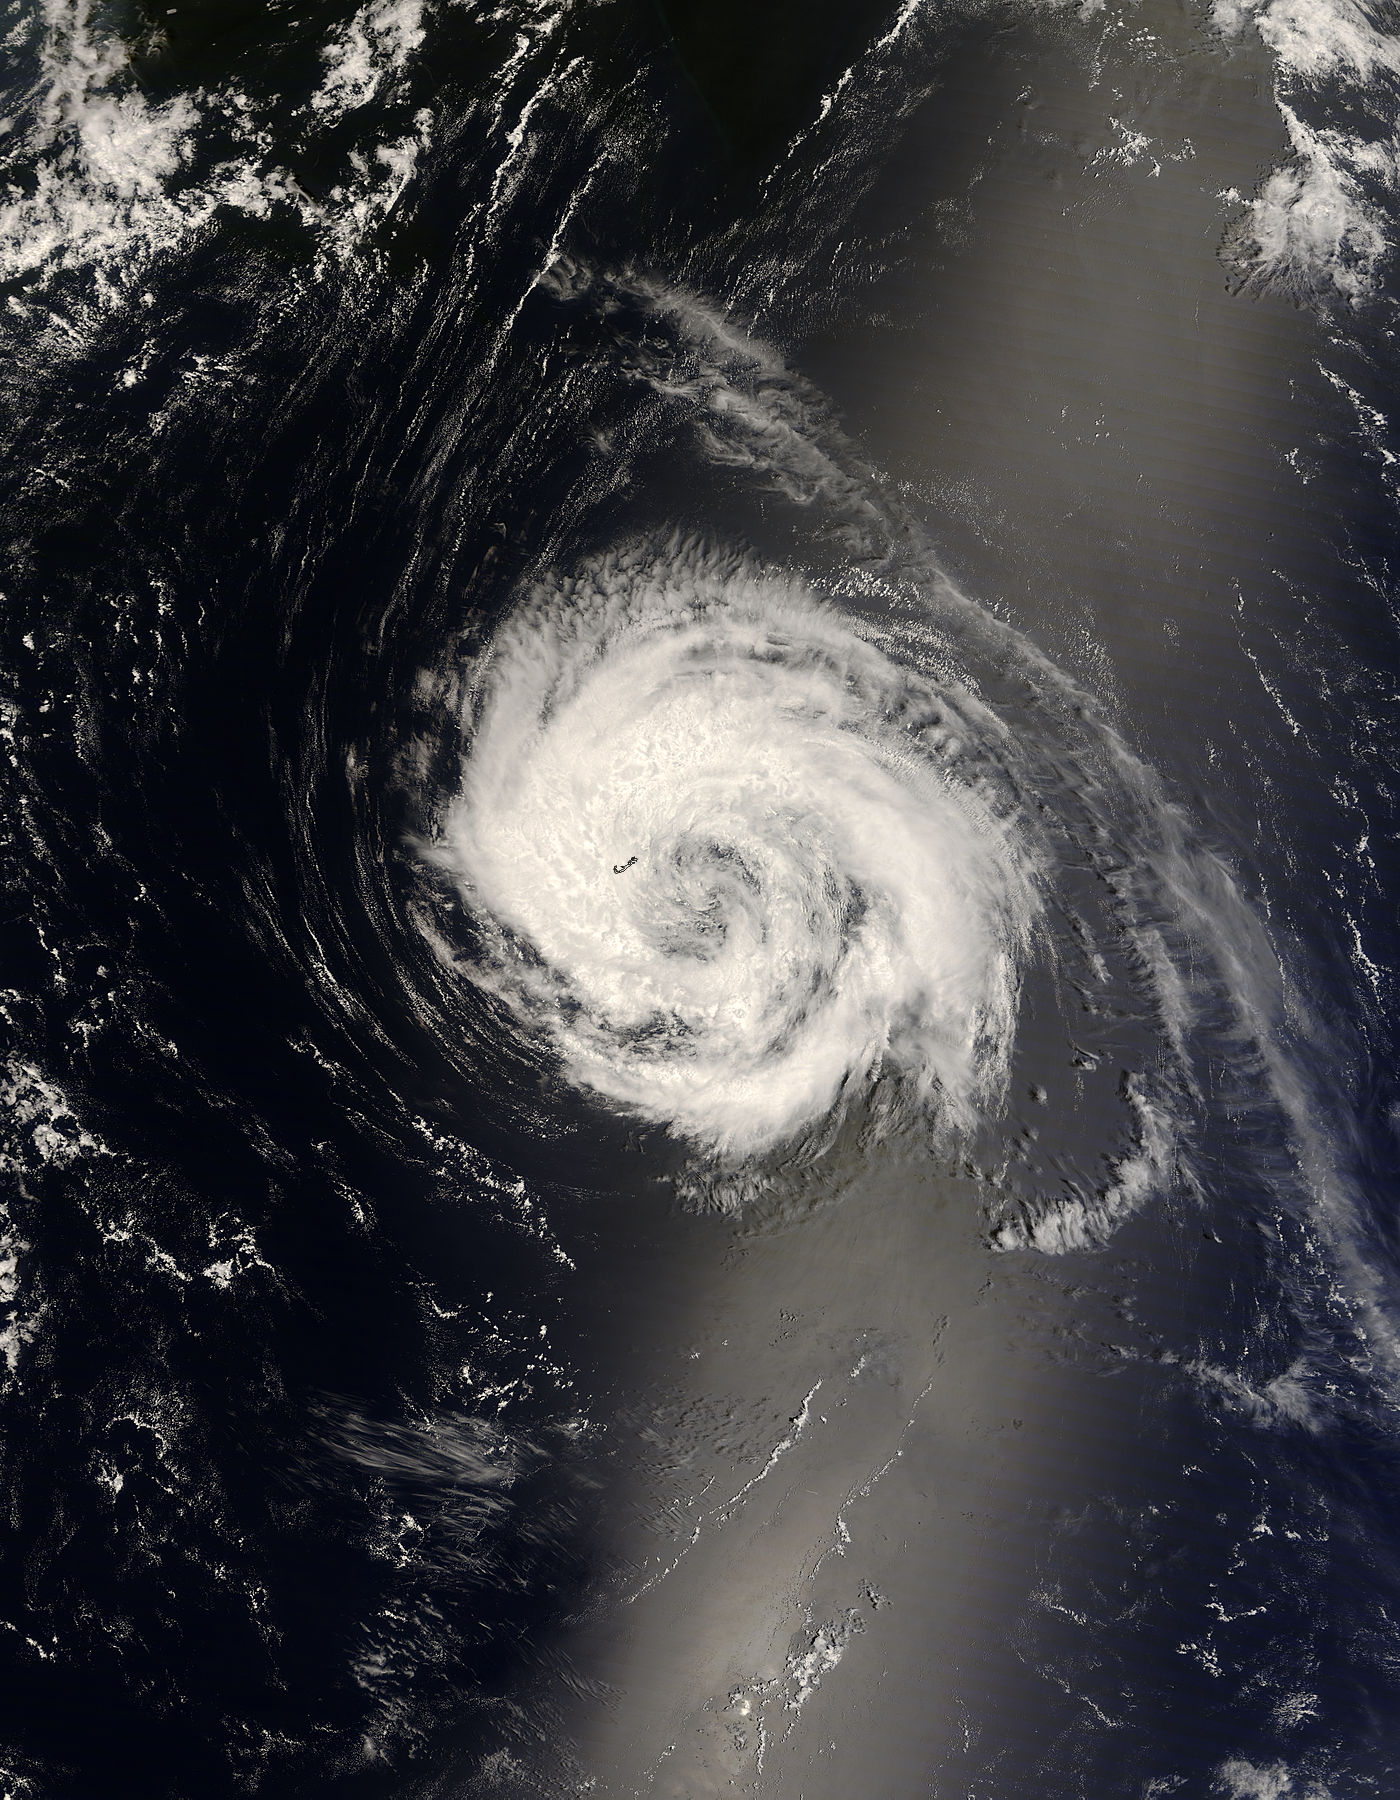 Tropical Storm Bertha (02L) over Bermuda - related image preview